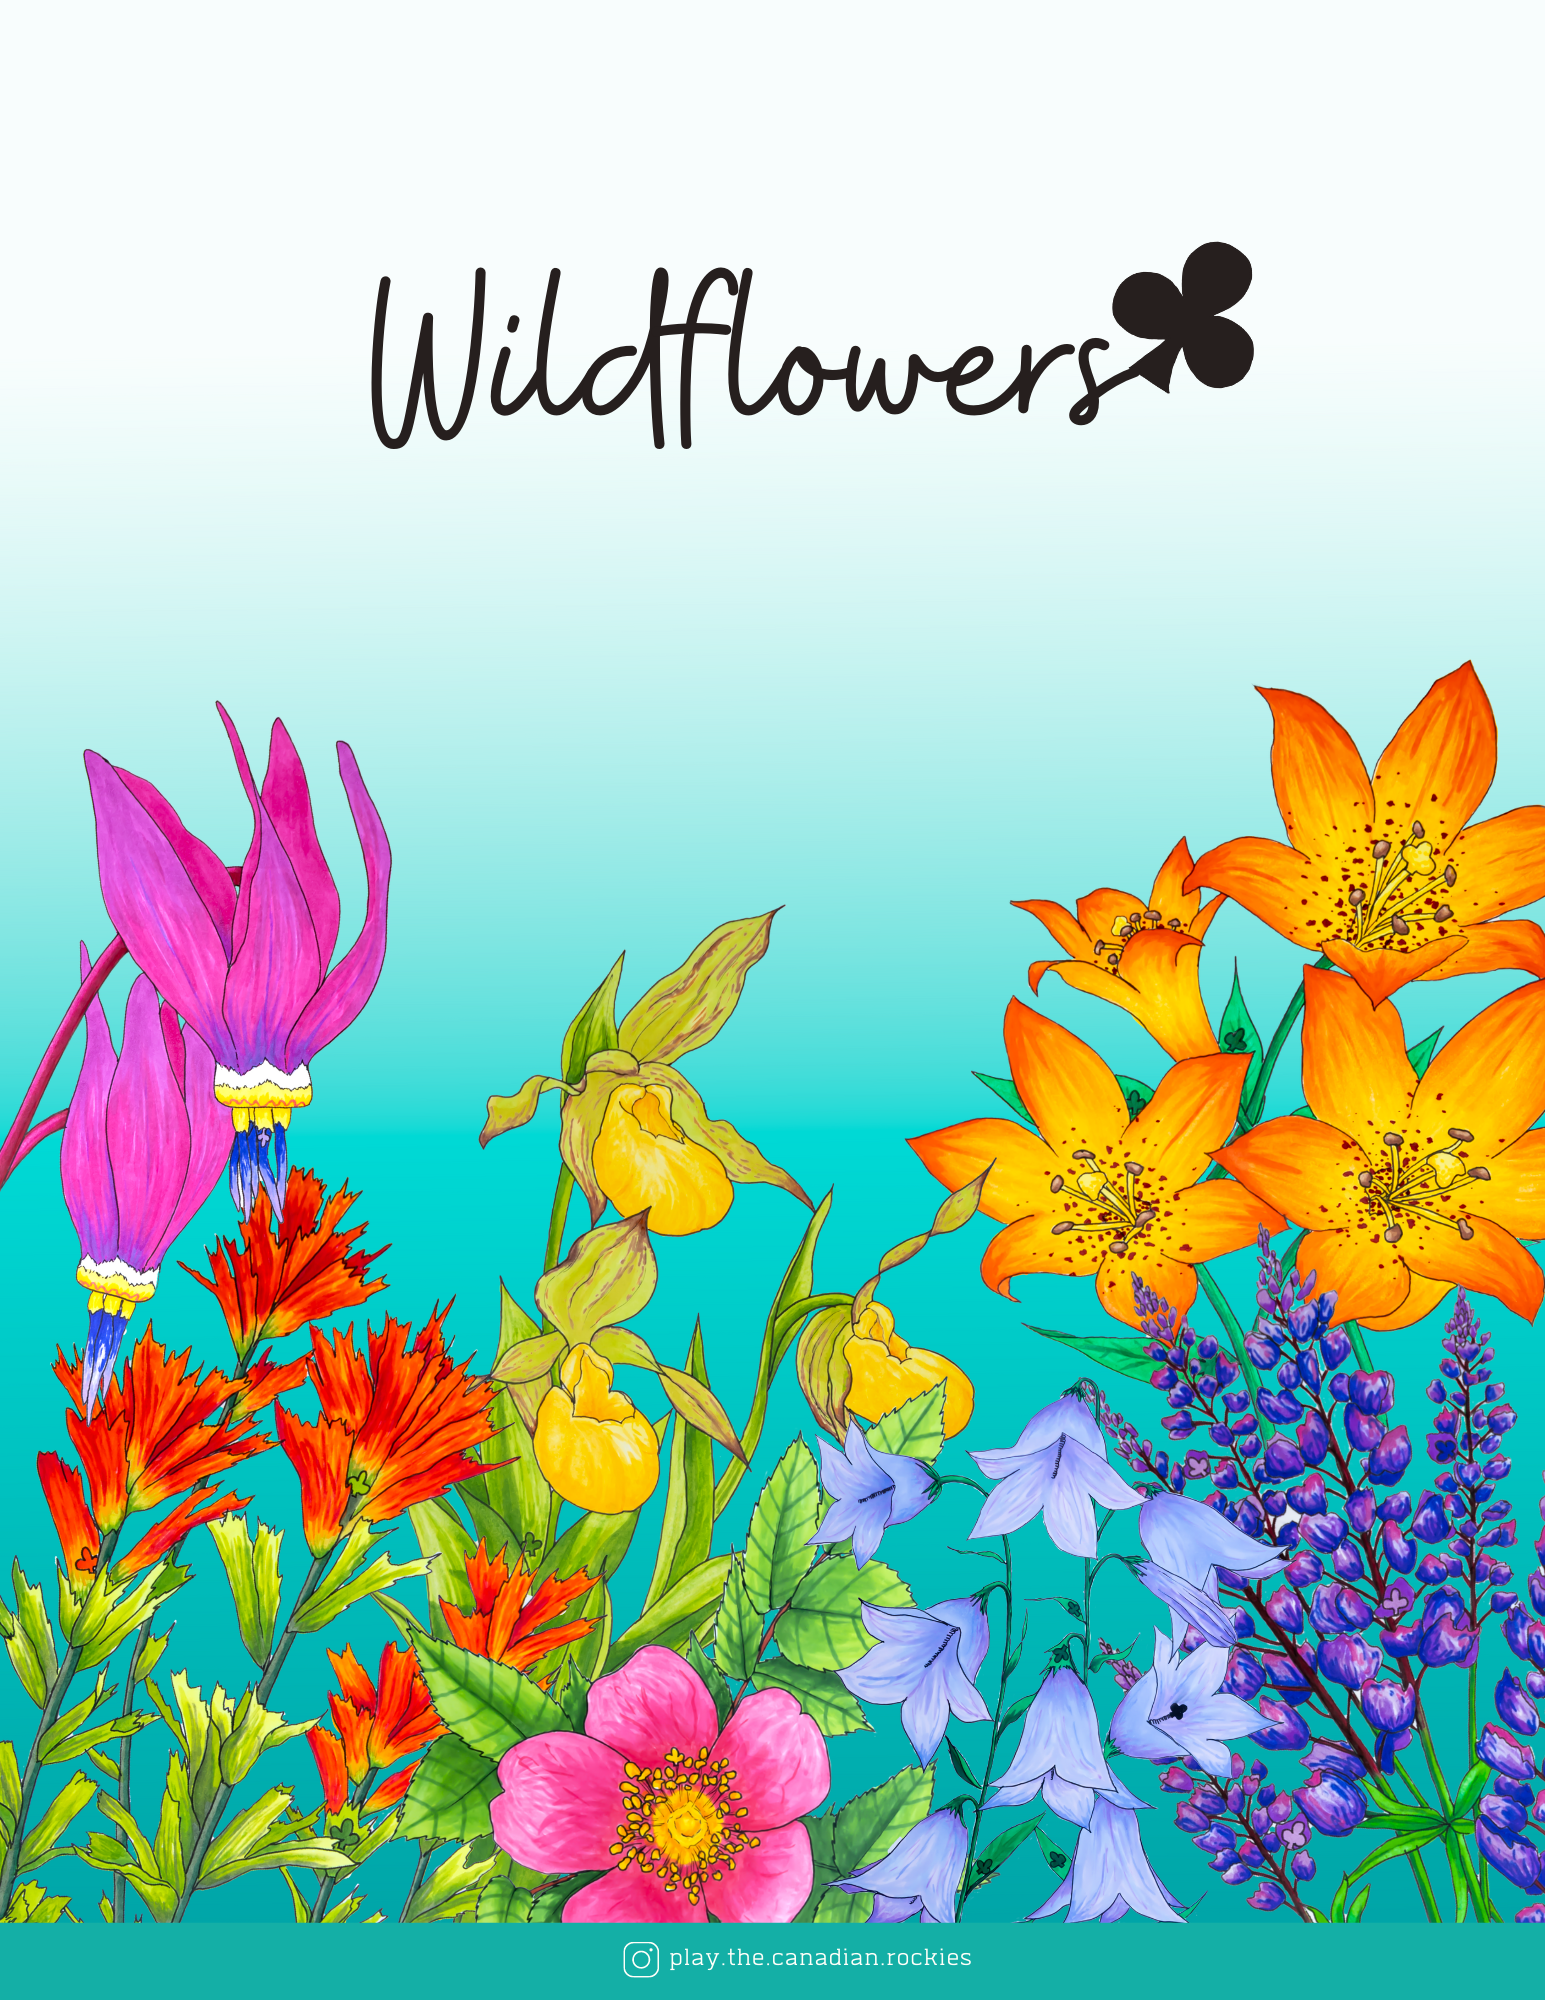 E-book of all: 54 Information Sheets • Mountains • Wildlife • Activities • Wildflowers